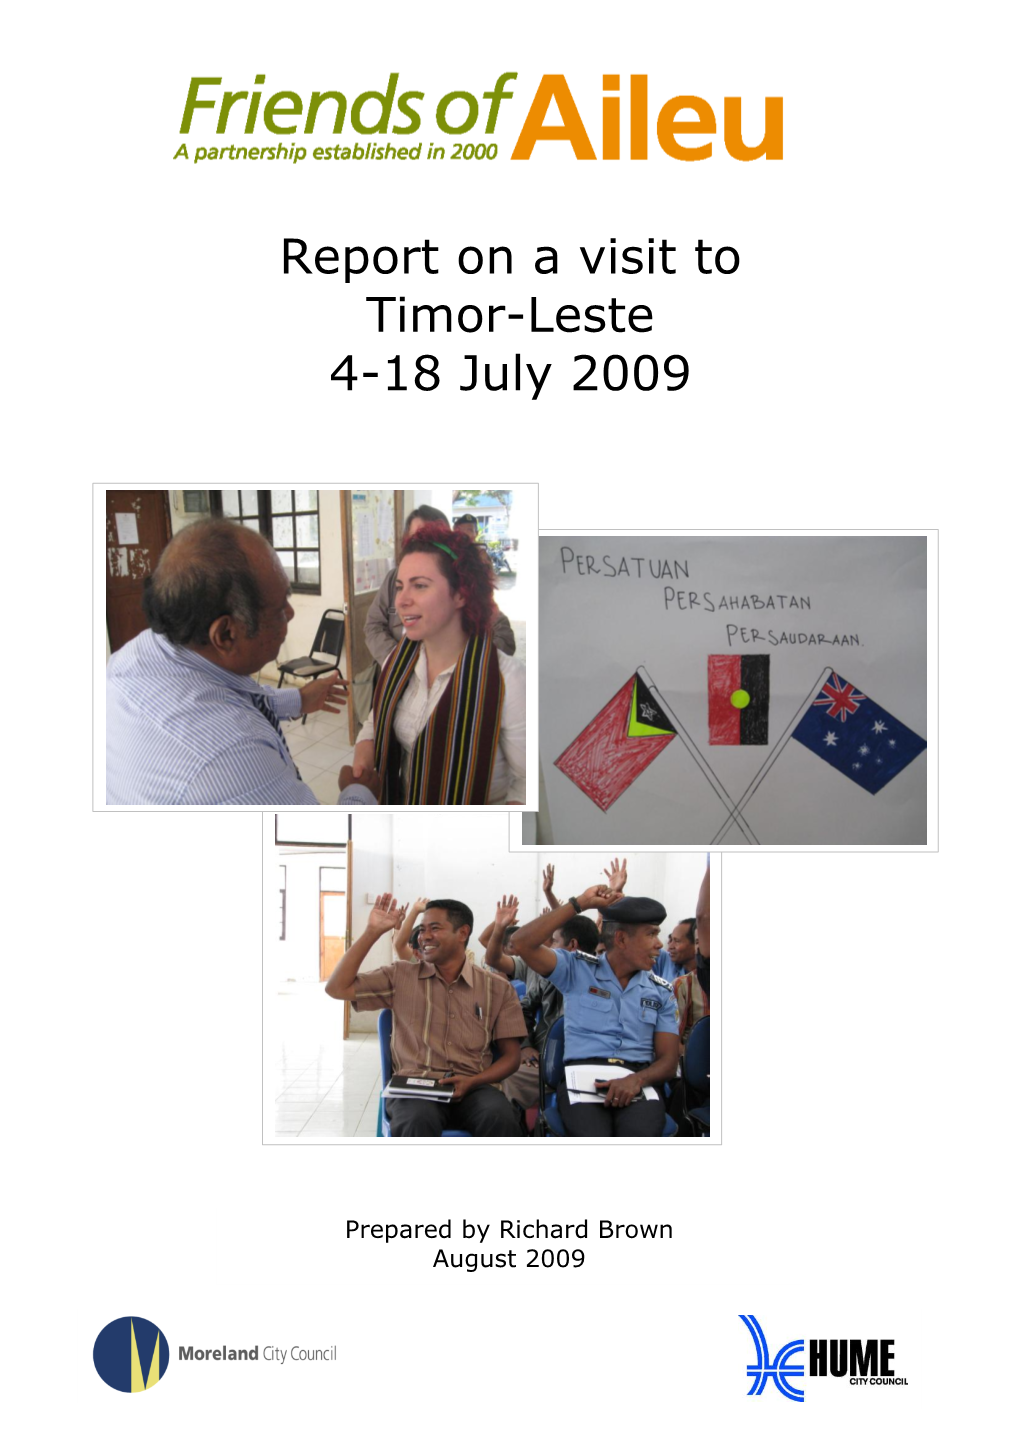 Report on a Visit to Timor-Leste 4-18 July 2009